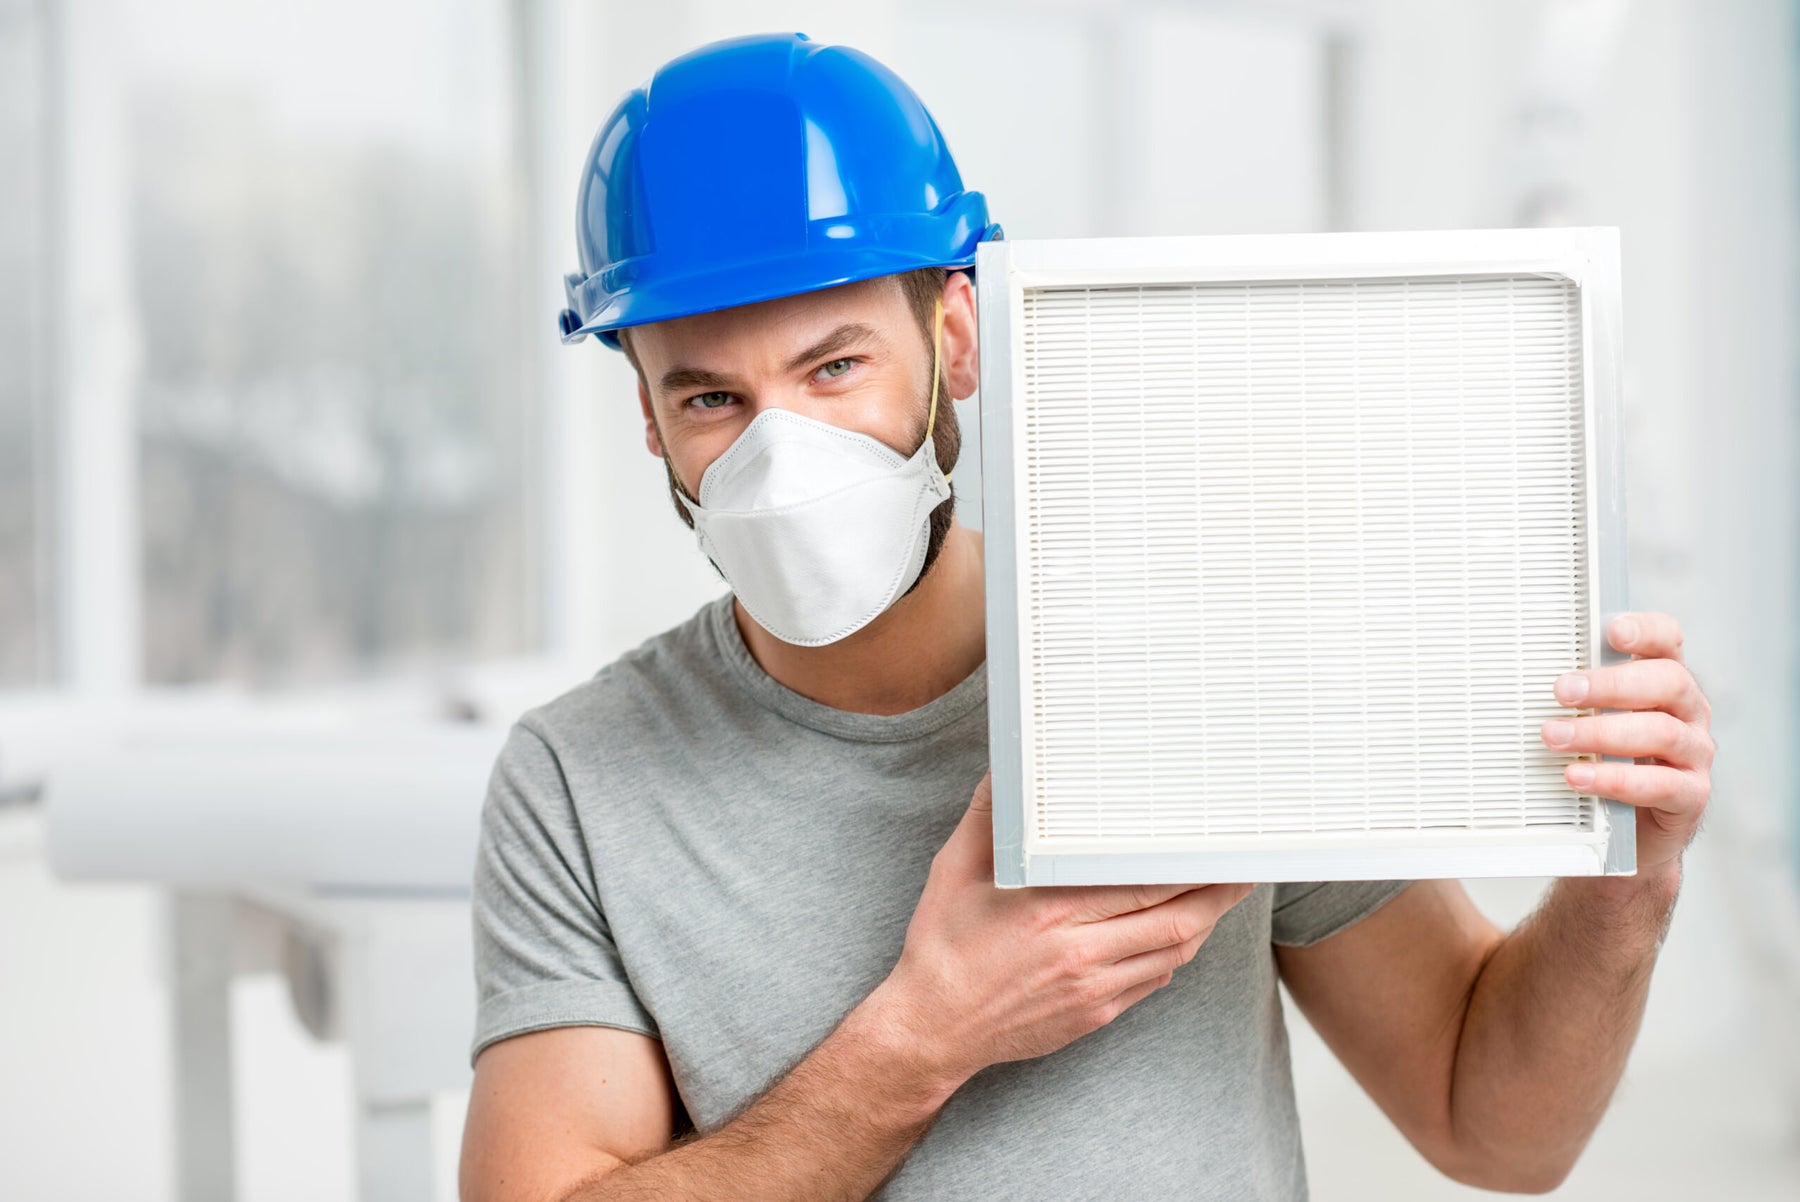 worker-holding-air-filter-installing-house-ventilation-system-purity-air-concept